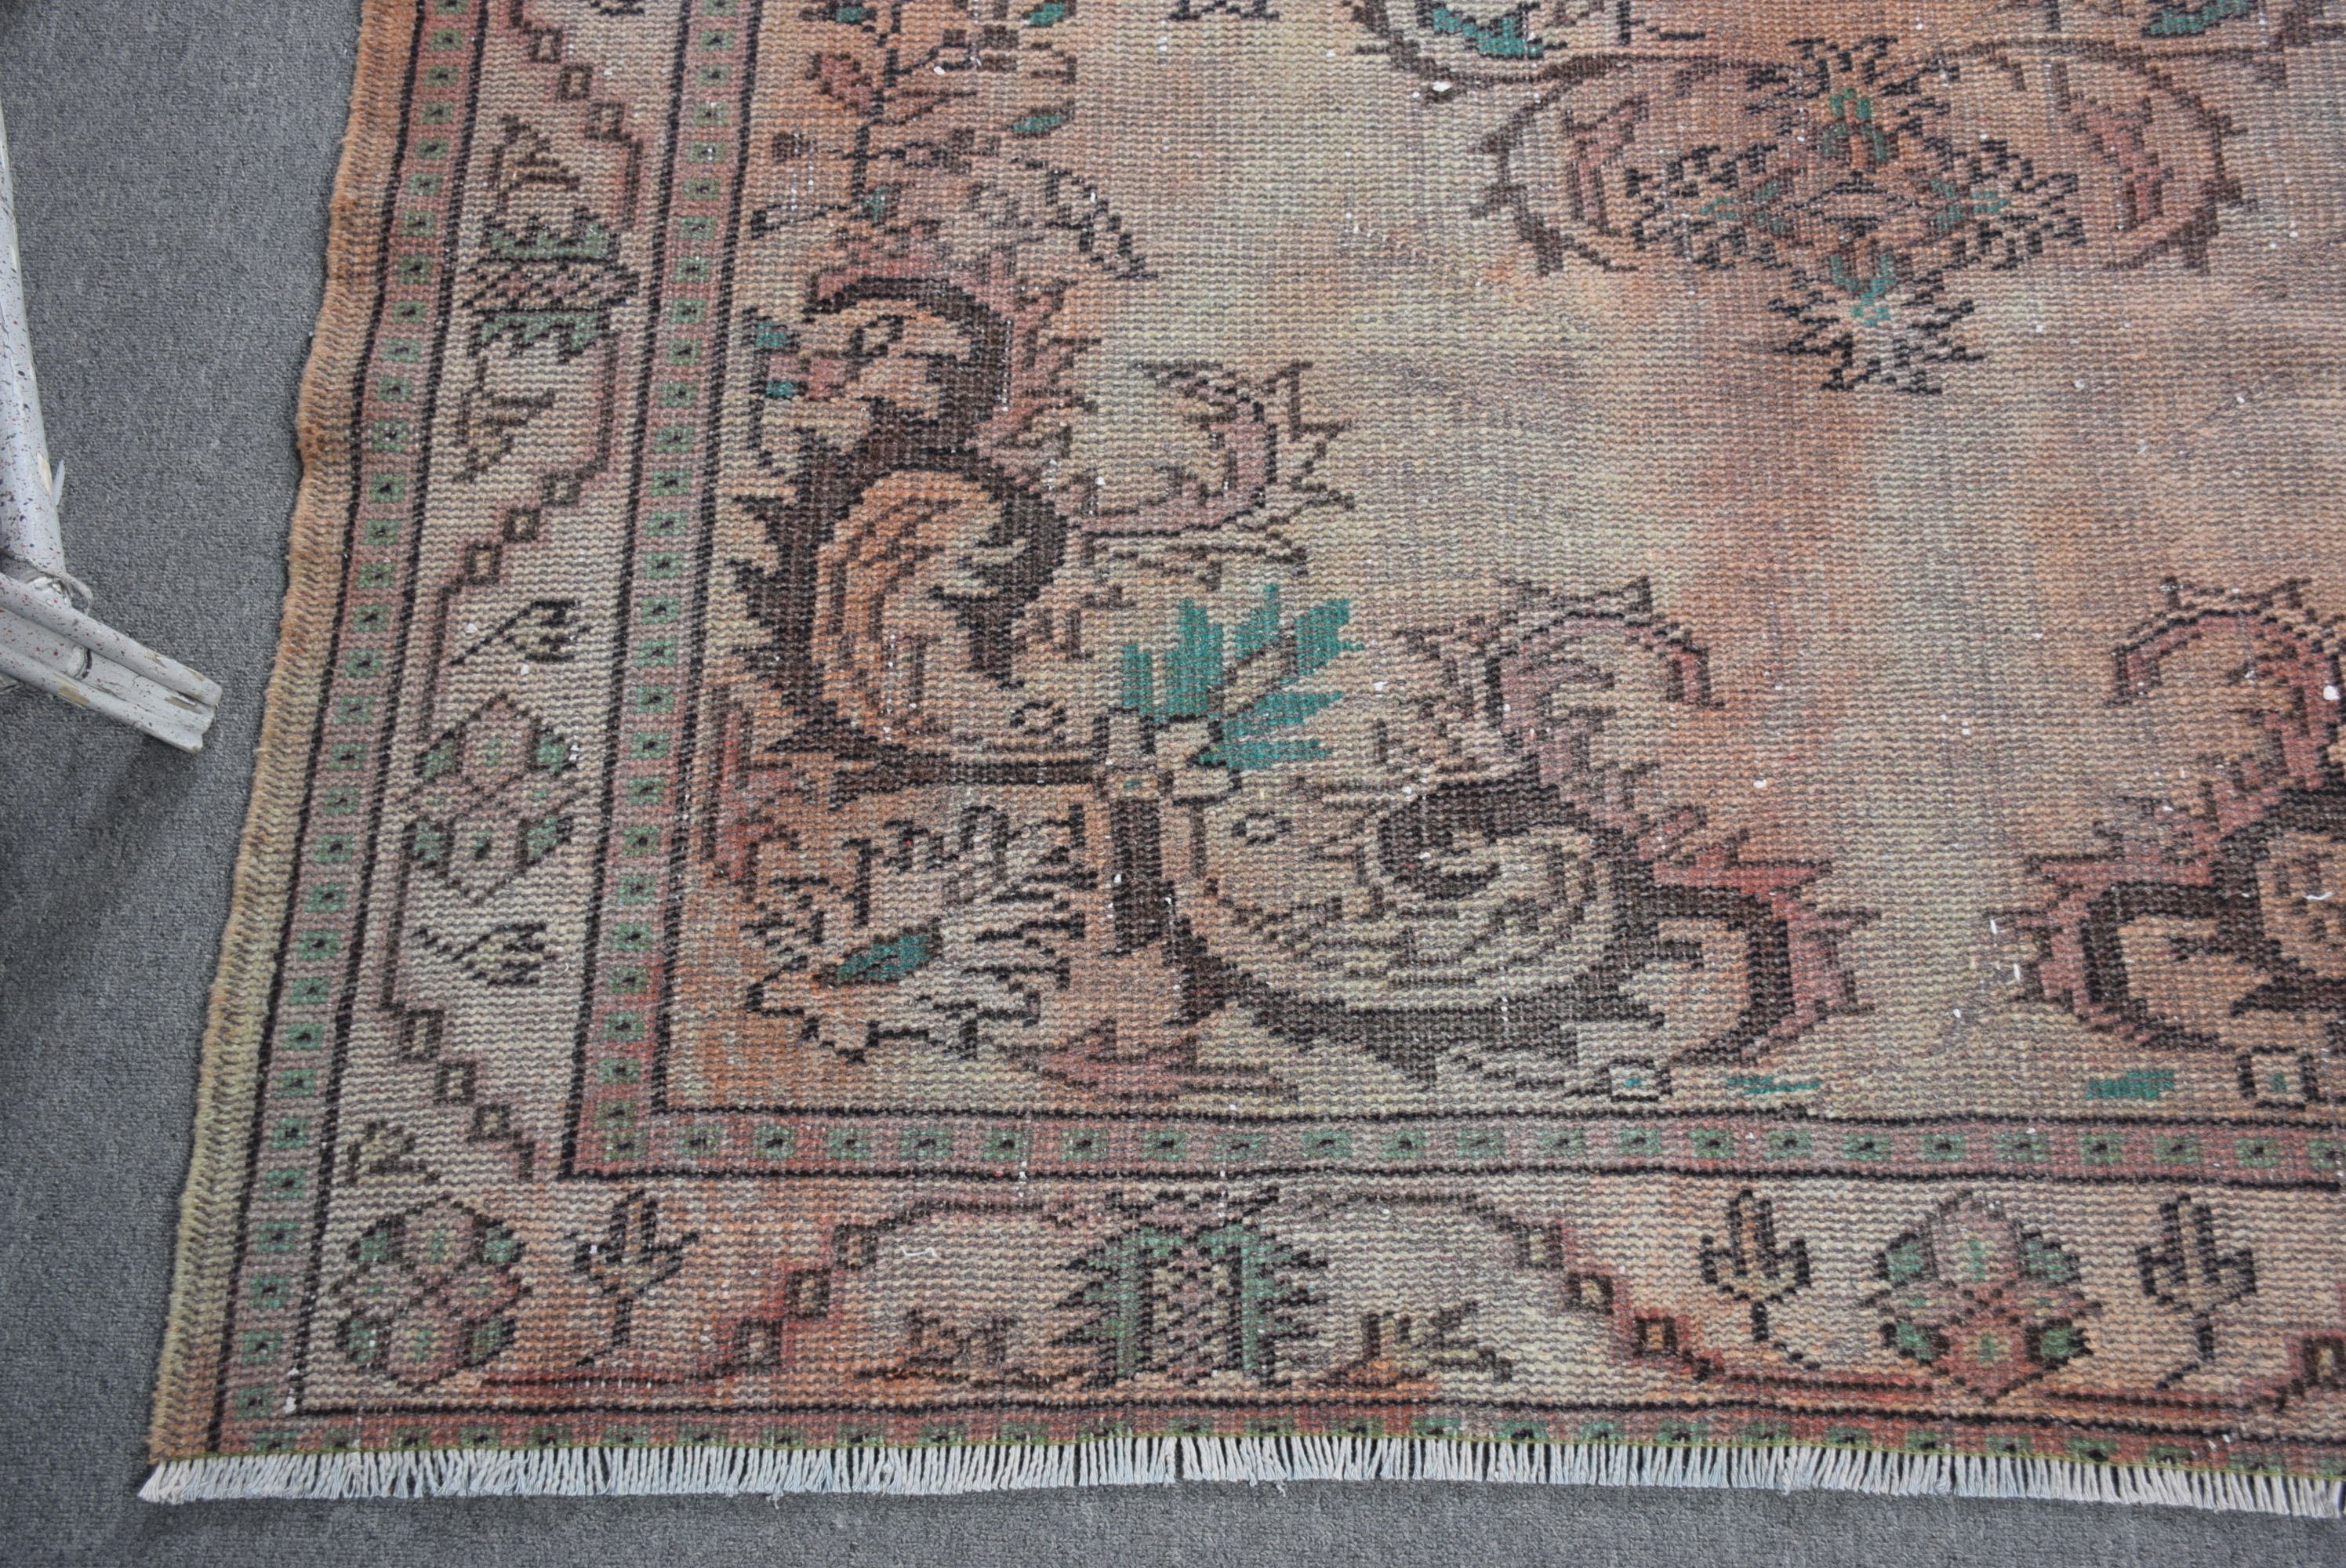 Oushak Rugs, Dining Room Rugs, Antique Rugs, Brown Kitchen Rugs, 5.6x8.9 ft Large Rug, Turkish Rugs, Salon Rug, Muted Rug, Vintage Rug